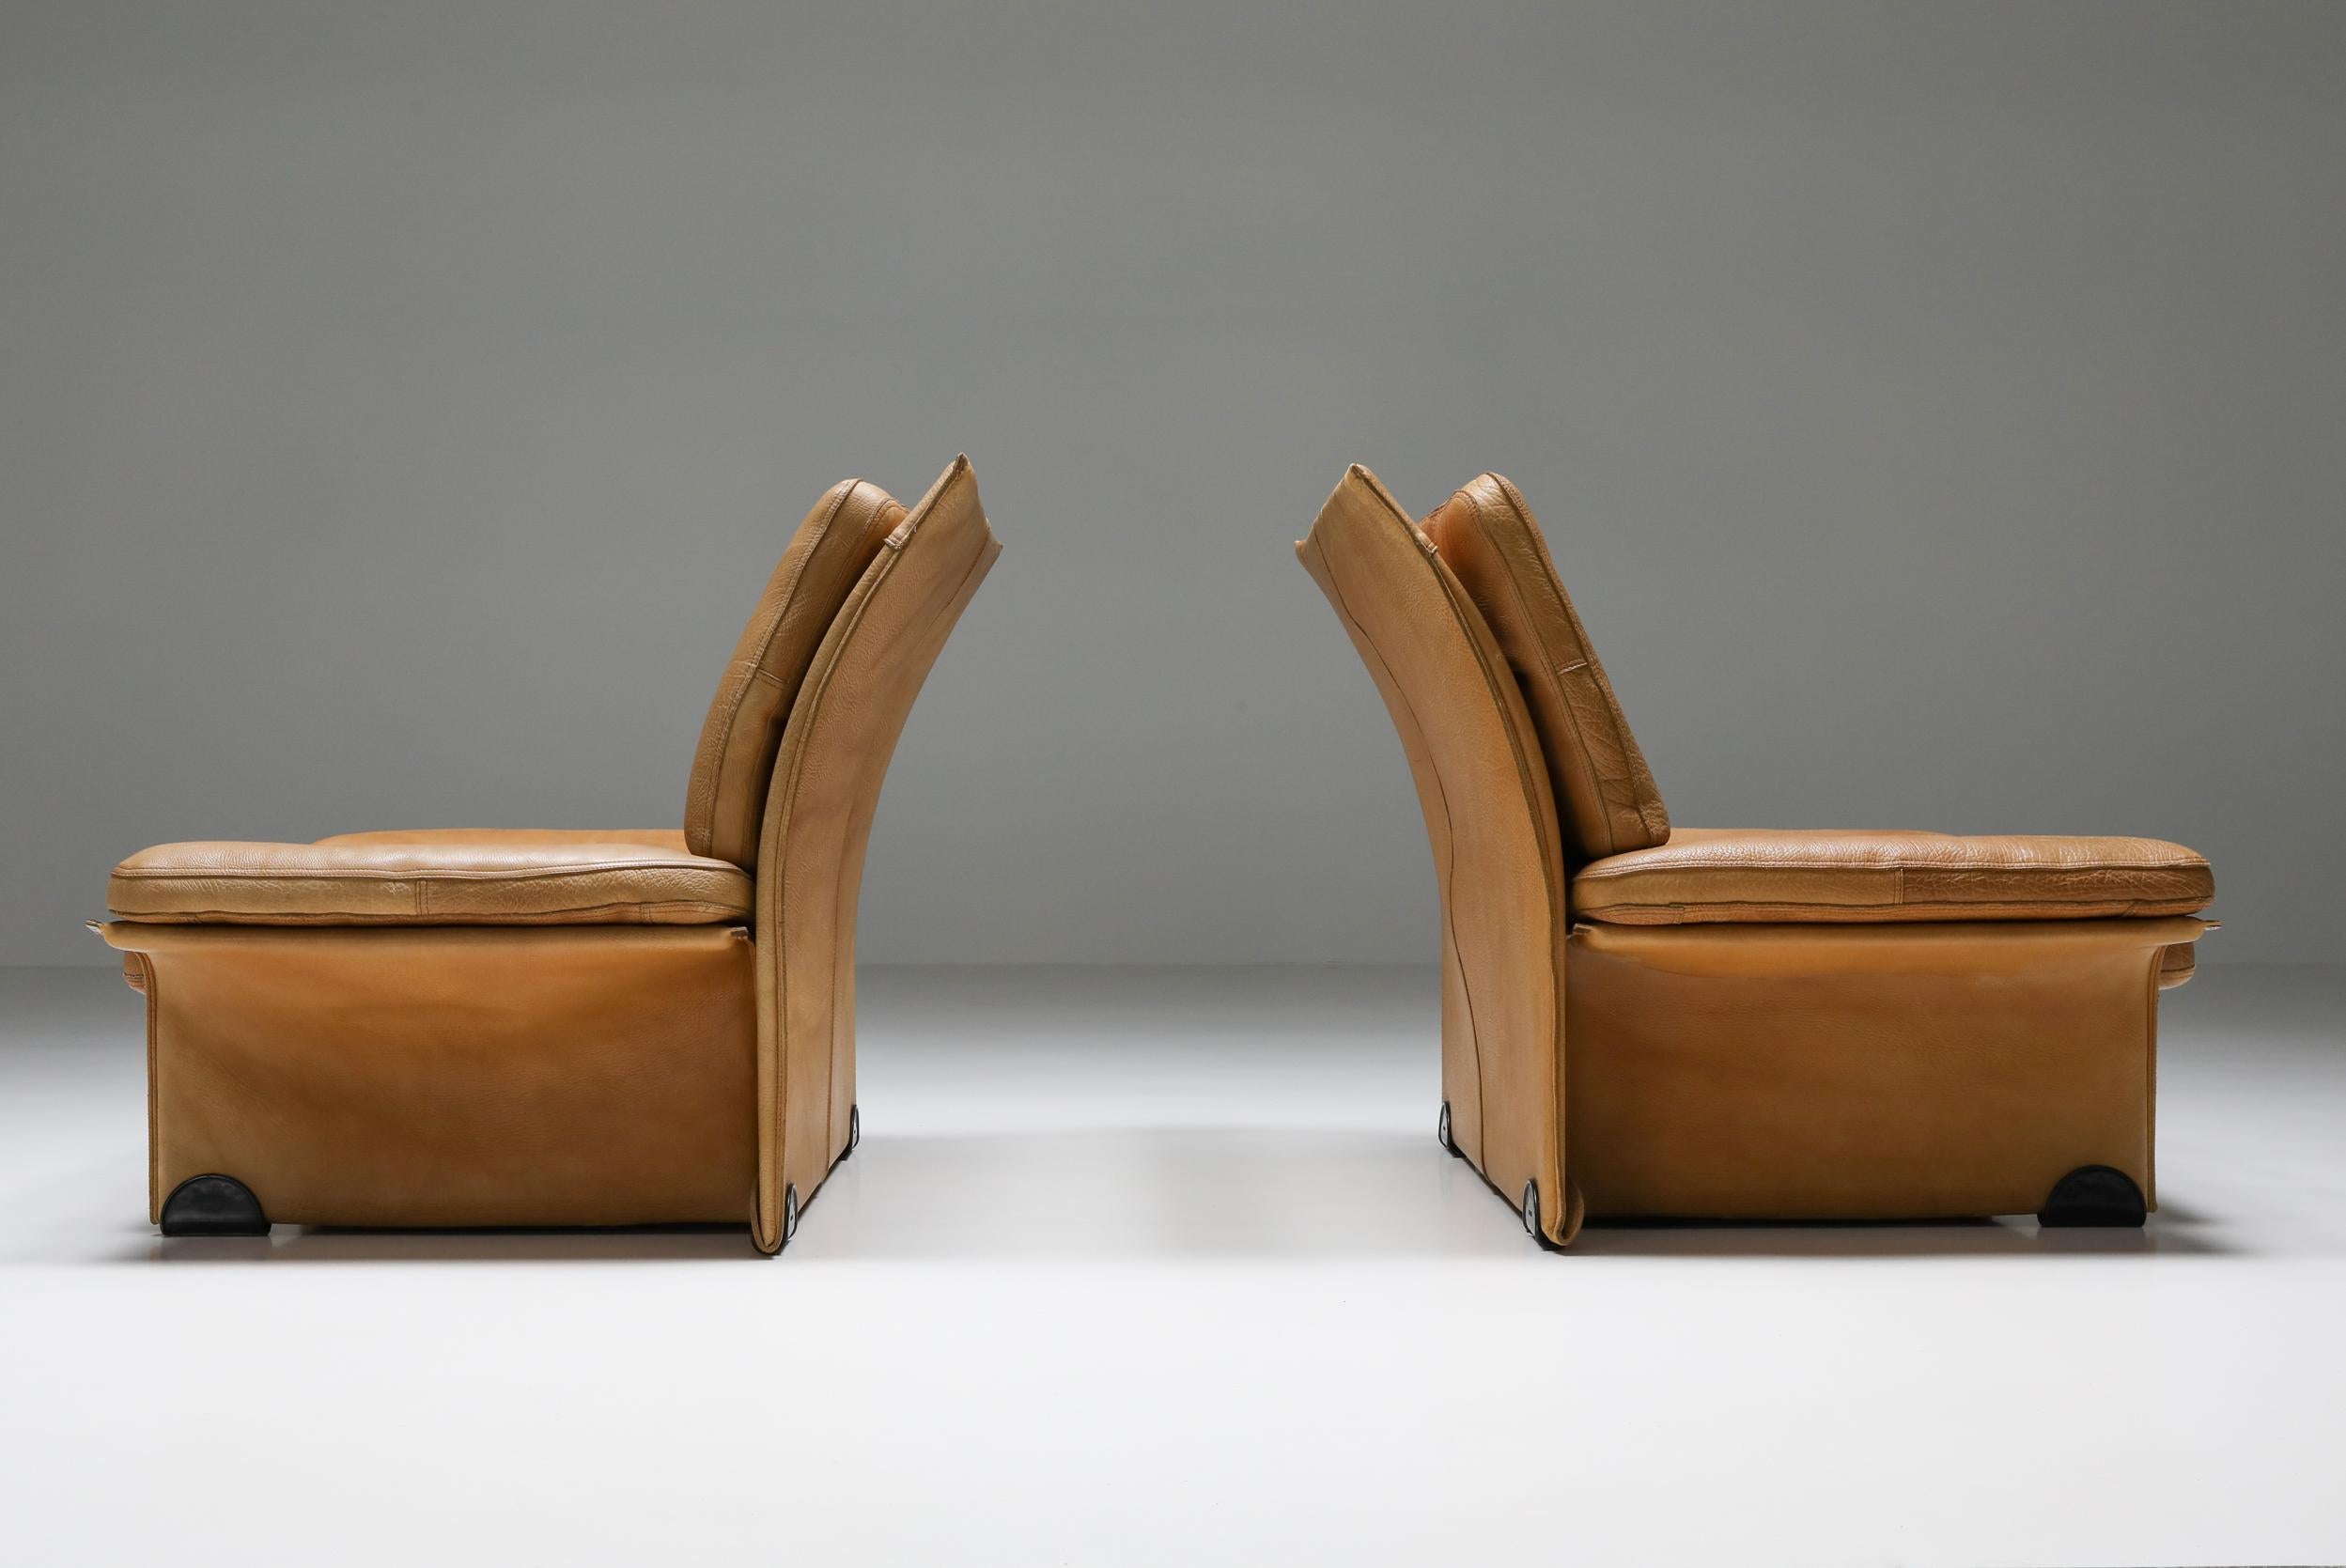 Italian Brunati Camel Leather Club Chairs, Mid-Century Modern, Italy, 1970's For Sale